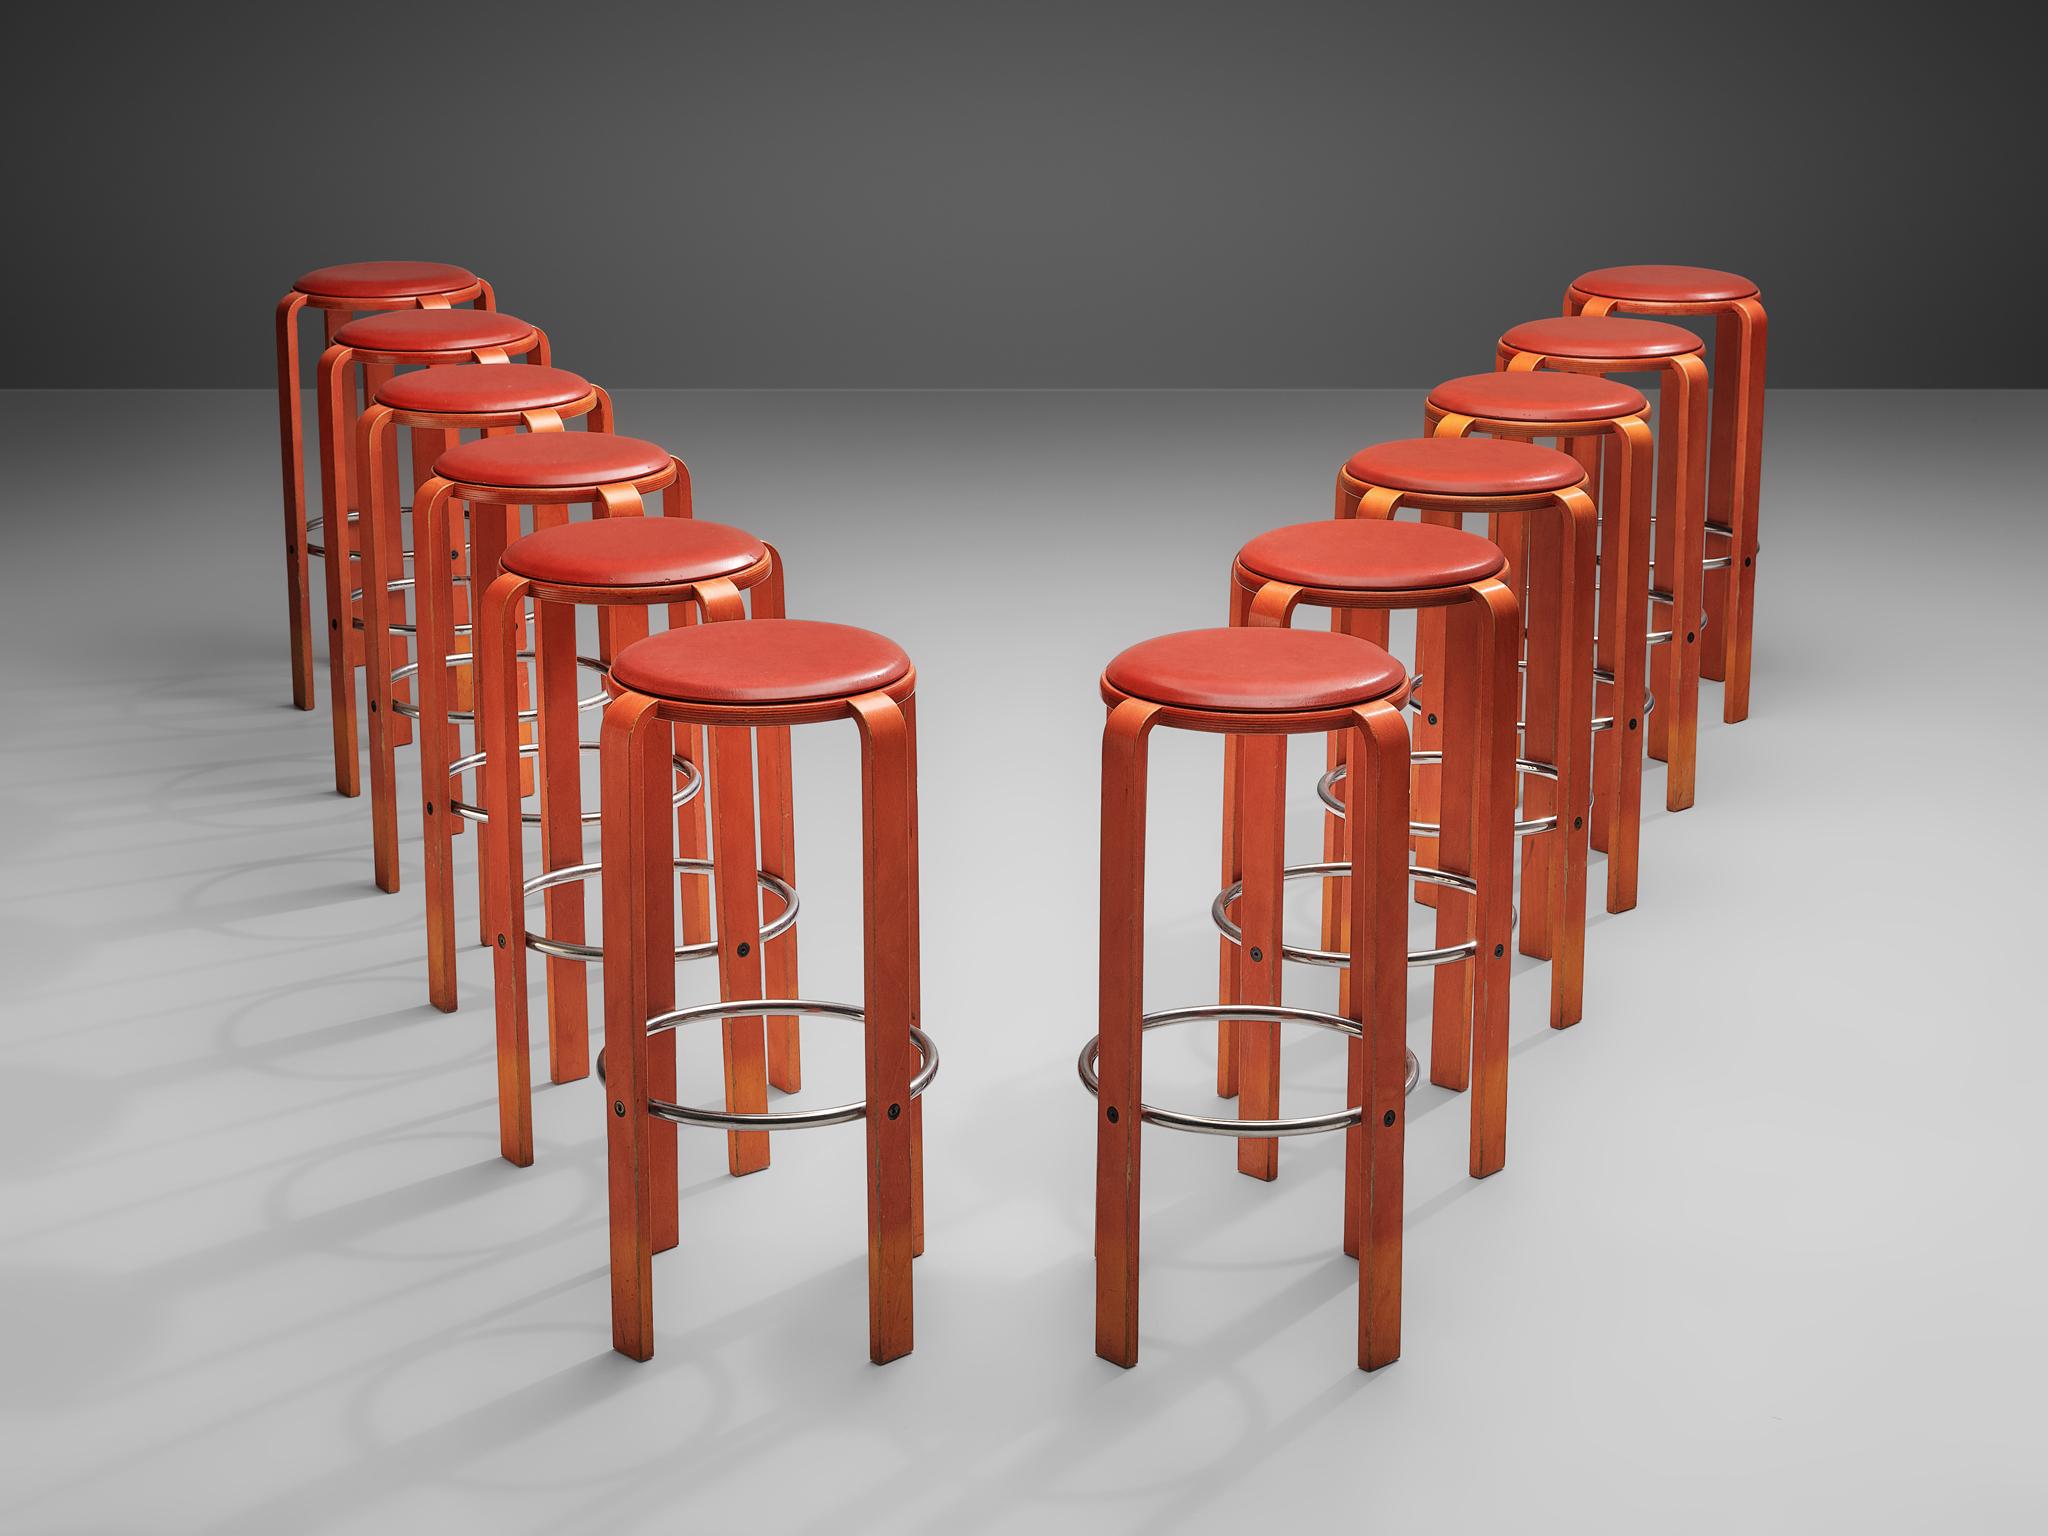 Bruno Rey for Dietiker, set of barstools, plywood, aluminum and leather, Switzerland, 1970s

Set of barstools by Bruno Rey and produced by Dietiker in the 1970s. The stools are made of red lacquered wood and the padded seat is finished with red